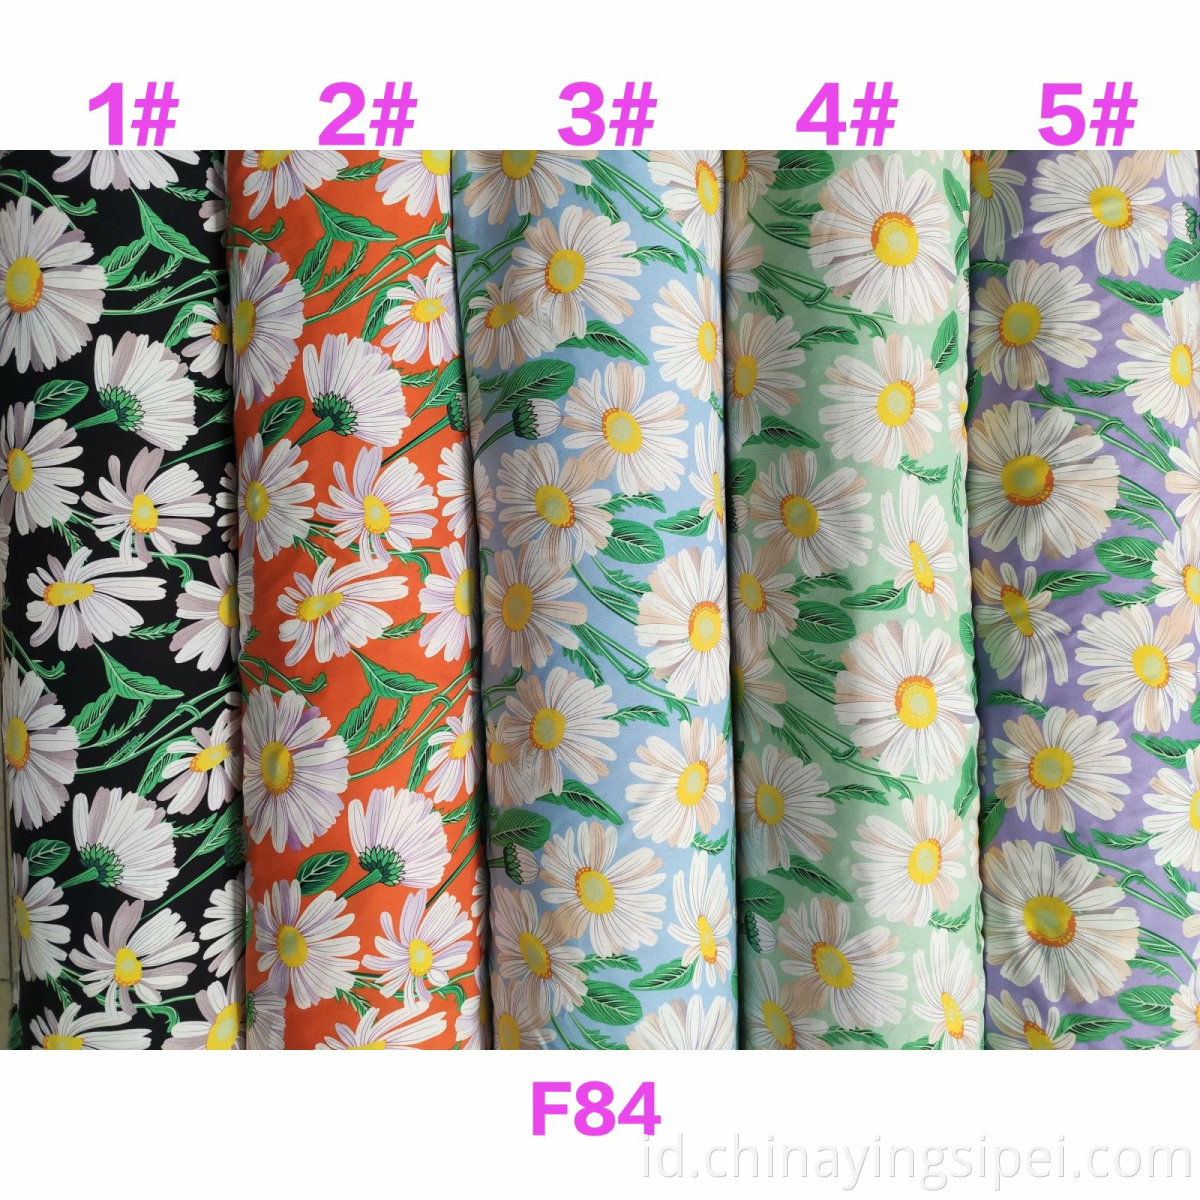 Stocklot Wholesale Twill Woven Floral Viscose Printing Fabric for Dress